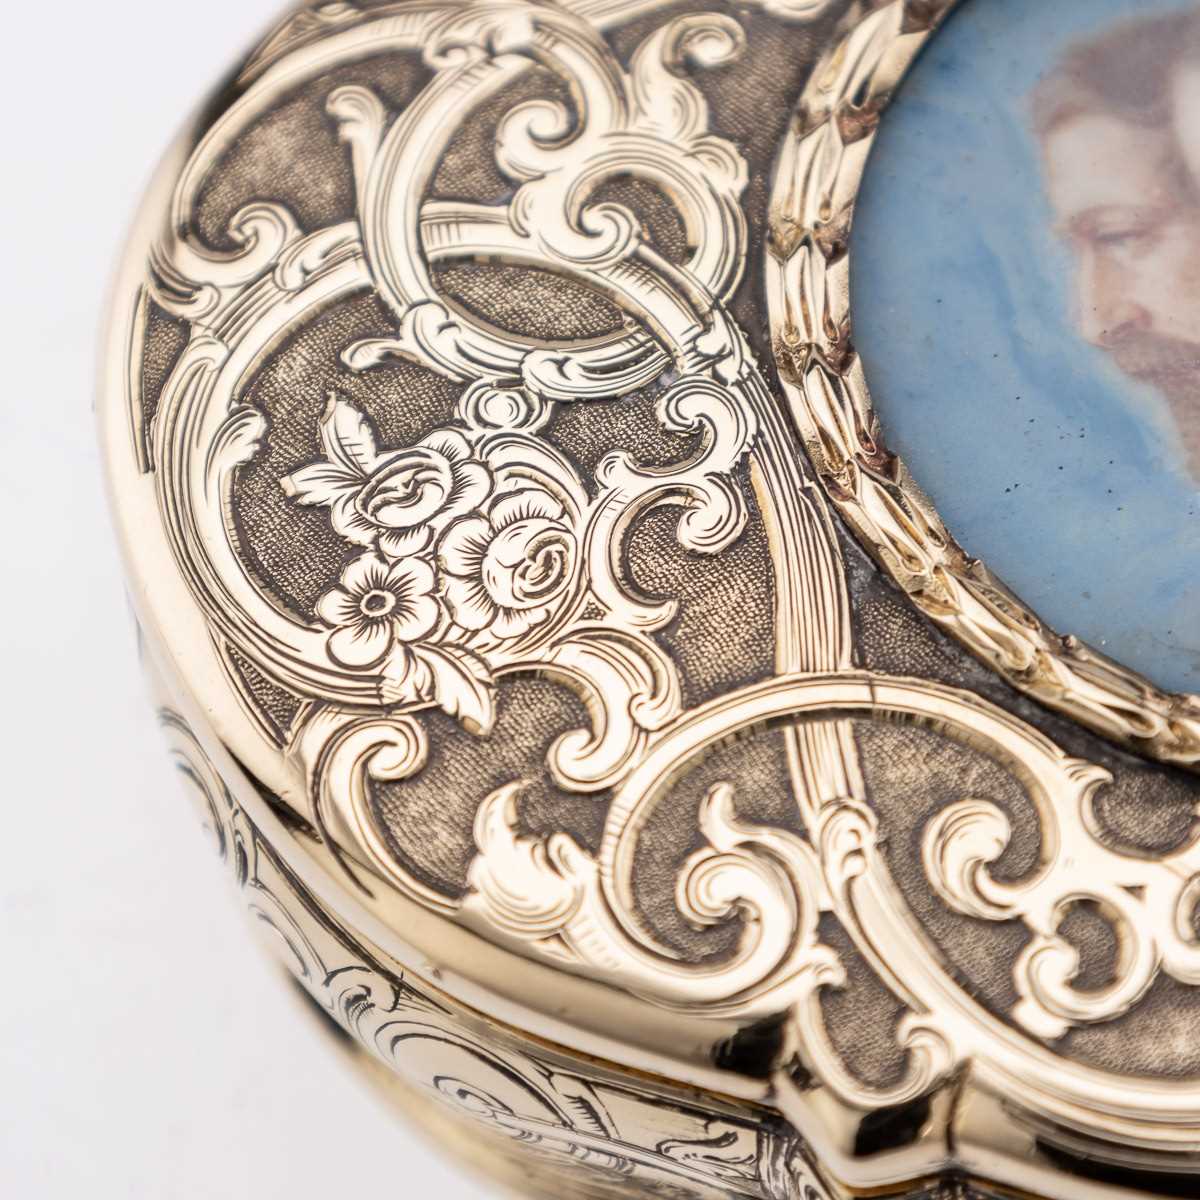 A FINE 19TH CENTURY 18CT GOLD ROYAL PRESENTATION SNUFF BOX WITH PORTRAIT OF NAPOELON III - Image 8 of 18